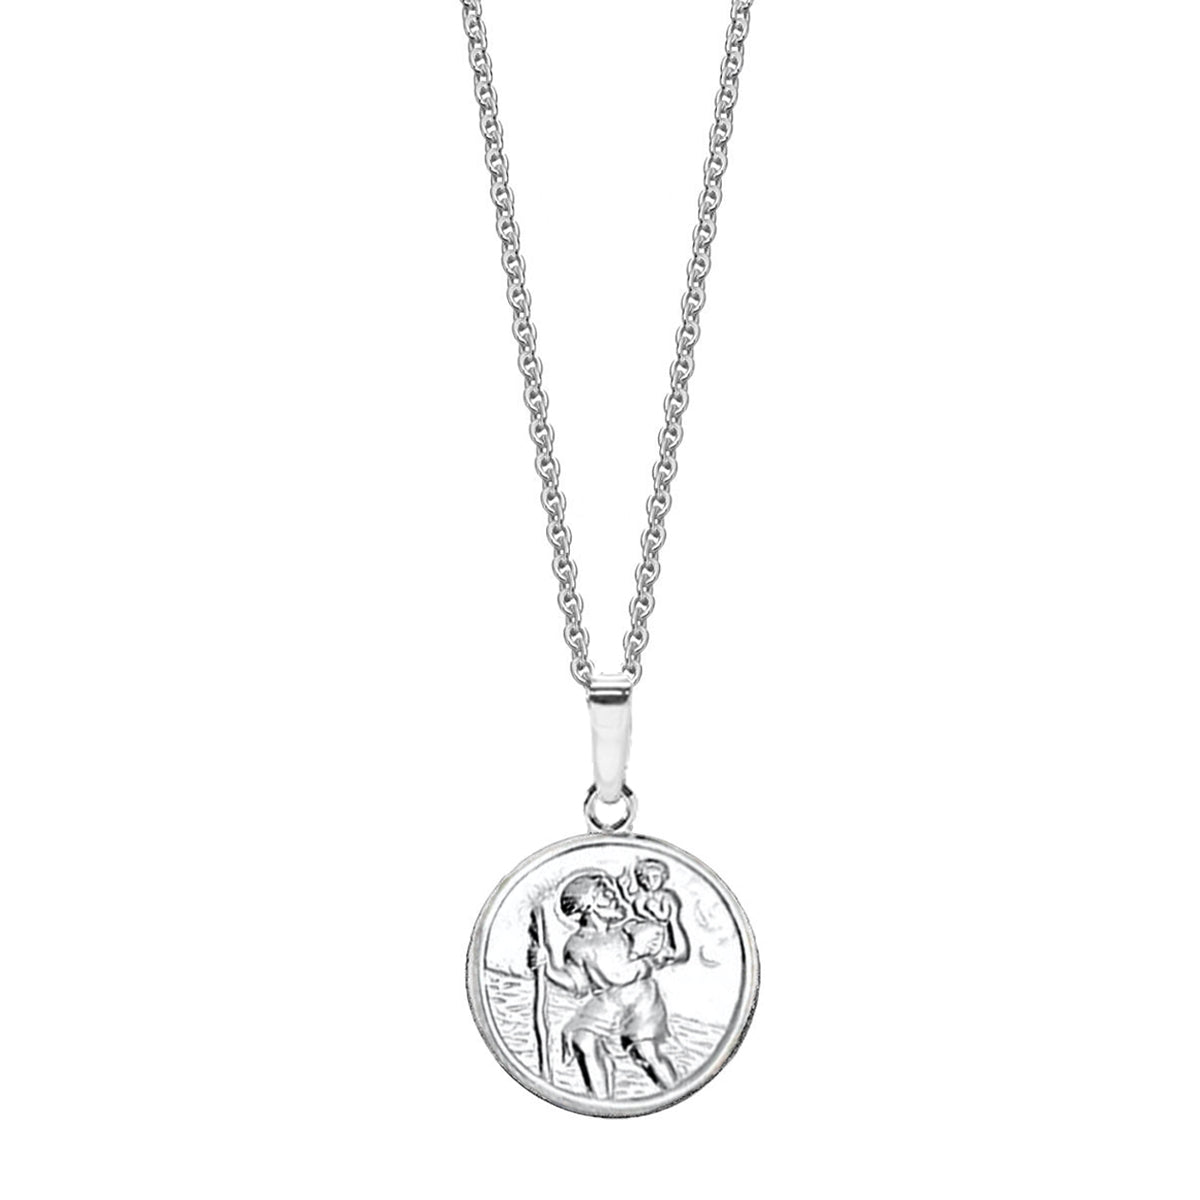 Silver St Christopher Medal Necklace | Hersey & Son Silversmiths